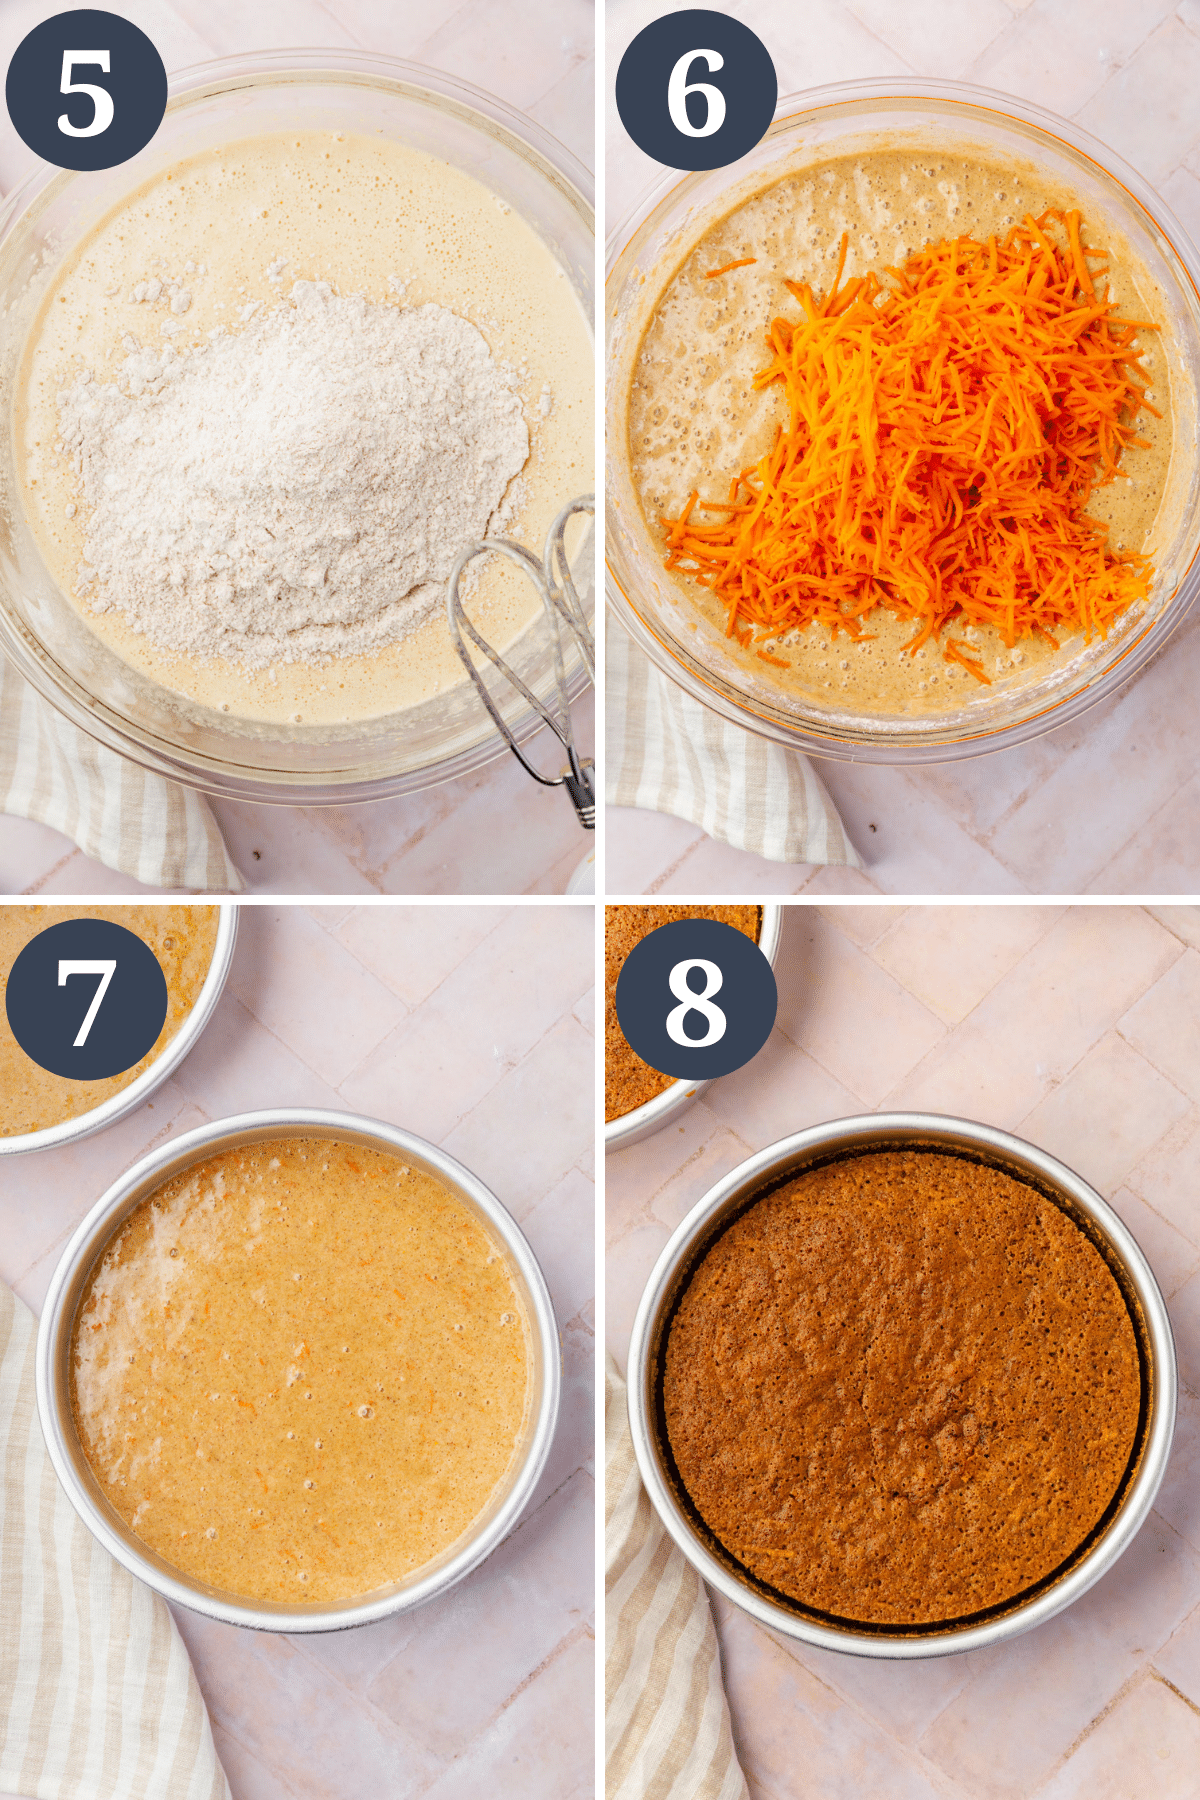 A collage showing steps to make carrot cake, including add dry ingredients to wet ingredients, add shredded carrots to batter, pour batter into cake pans, bake the cake. 